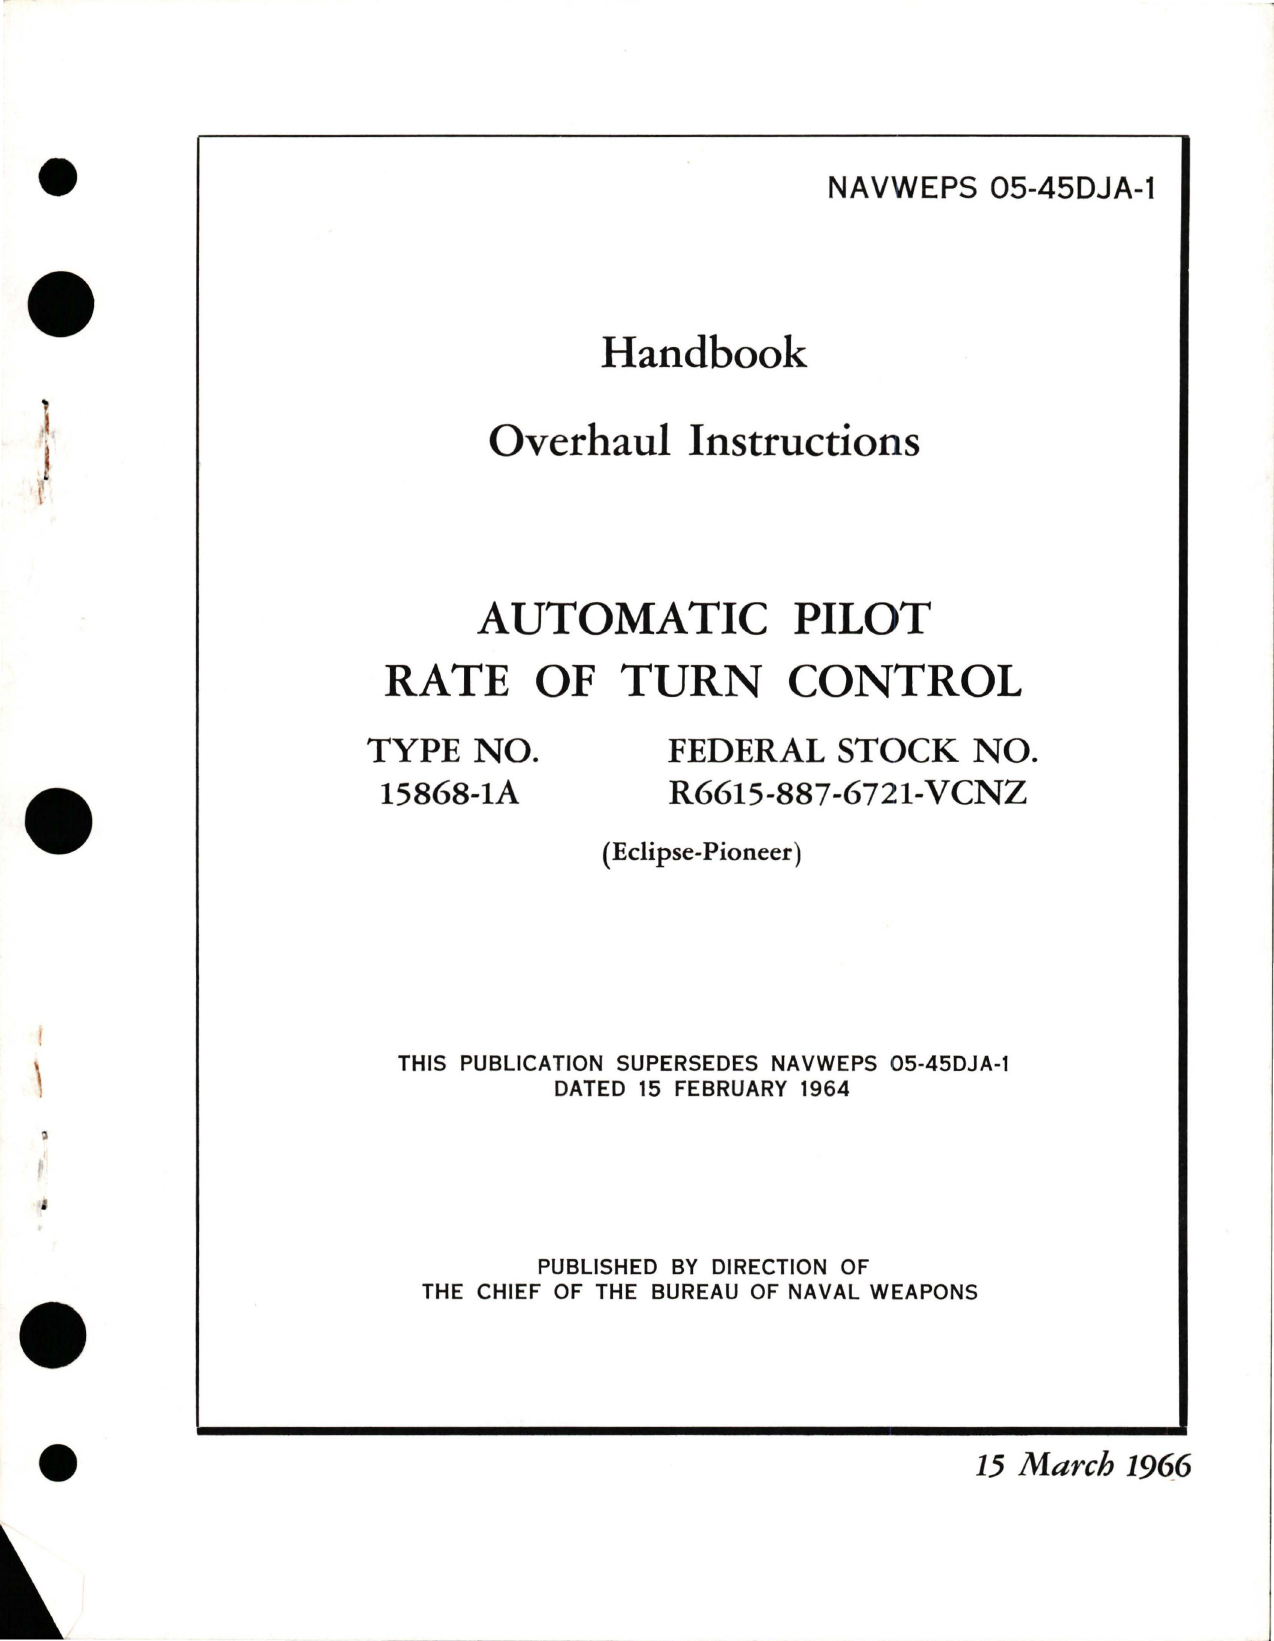 Sample page 1 from AirCorps Library document: Overhaul Instructions for Automatic Pilot Rate of Turn Control - Type 15868-1A